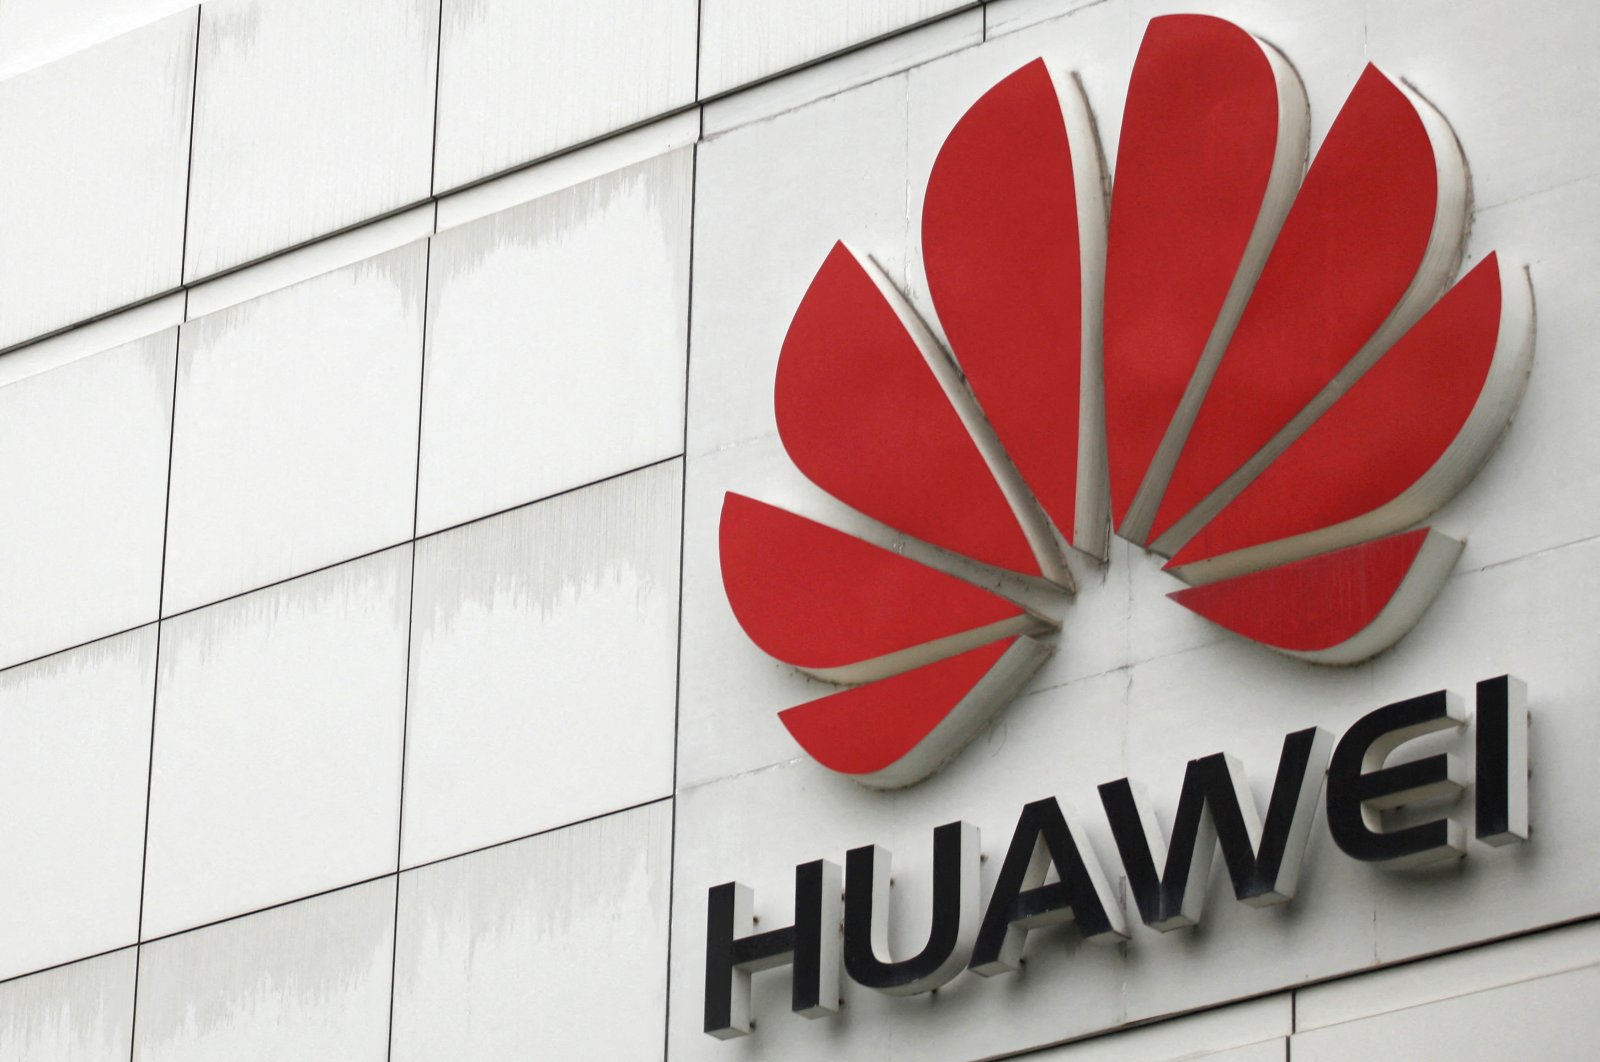 The logo of Huawei Technologies Co. Ltd. is seen outside its headquarters in Shenzhen, Guangdong province, China, April 17, 2012. (Reuters Photo)